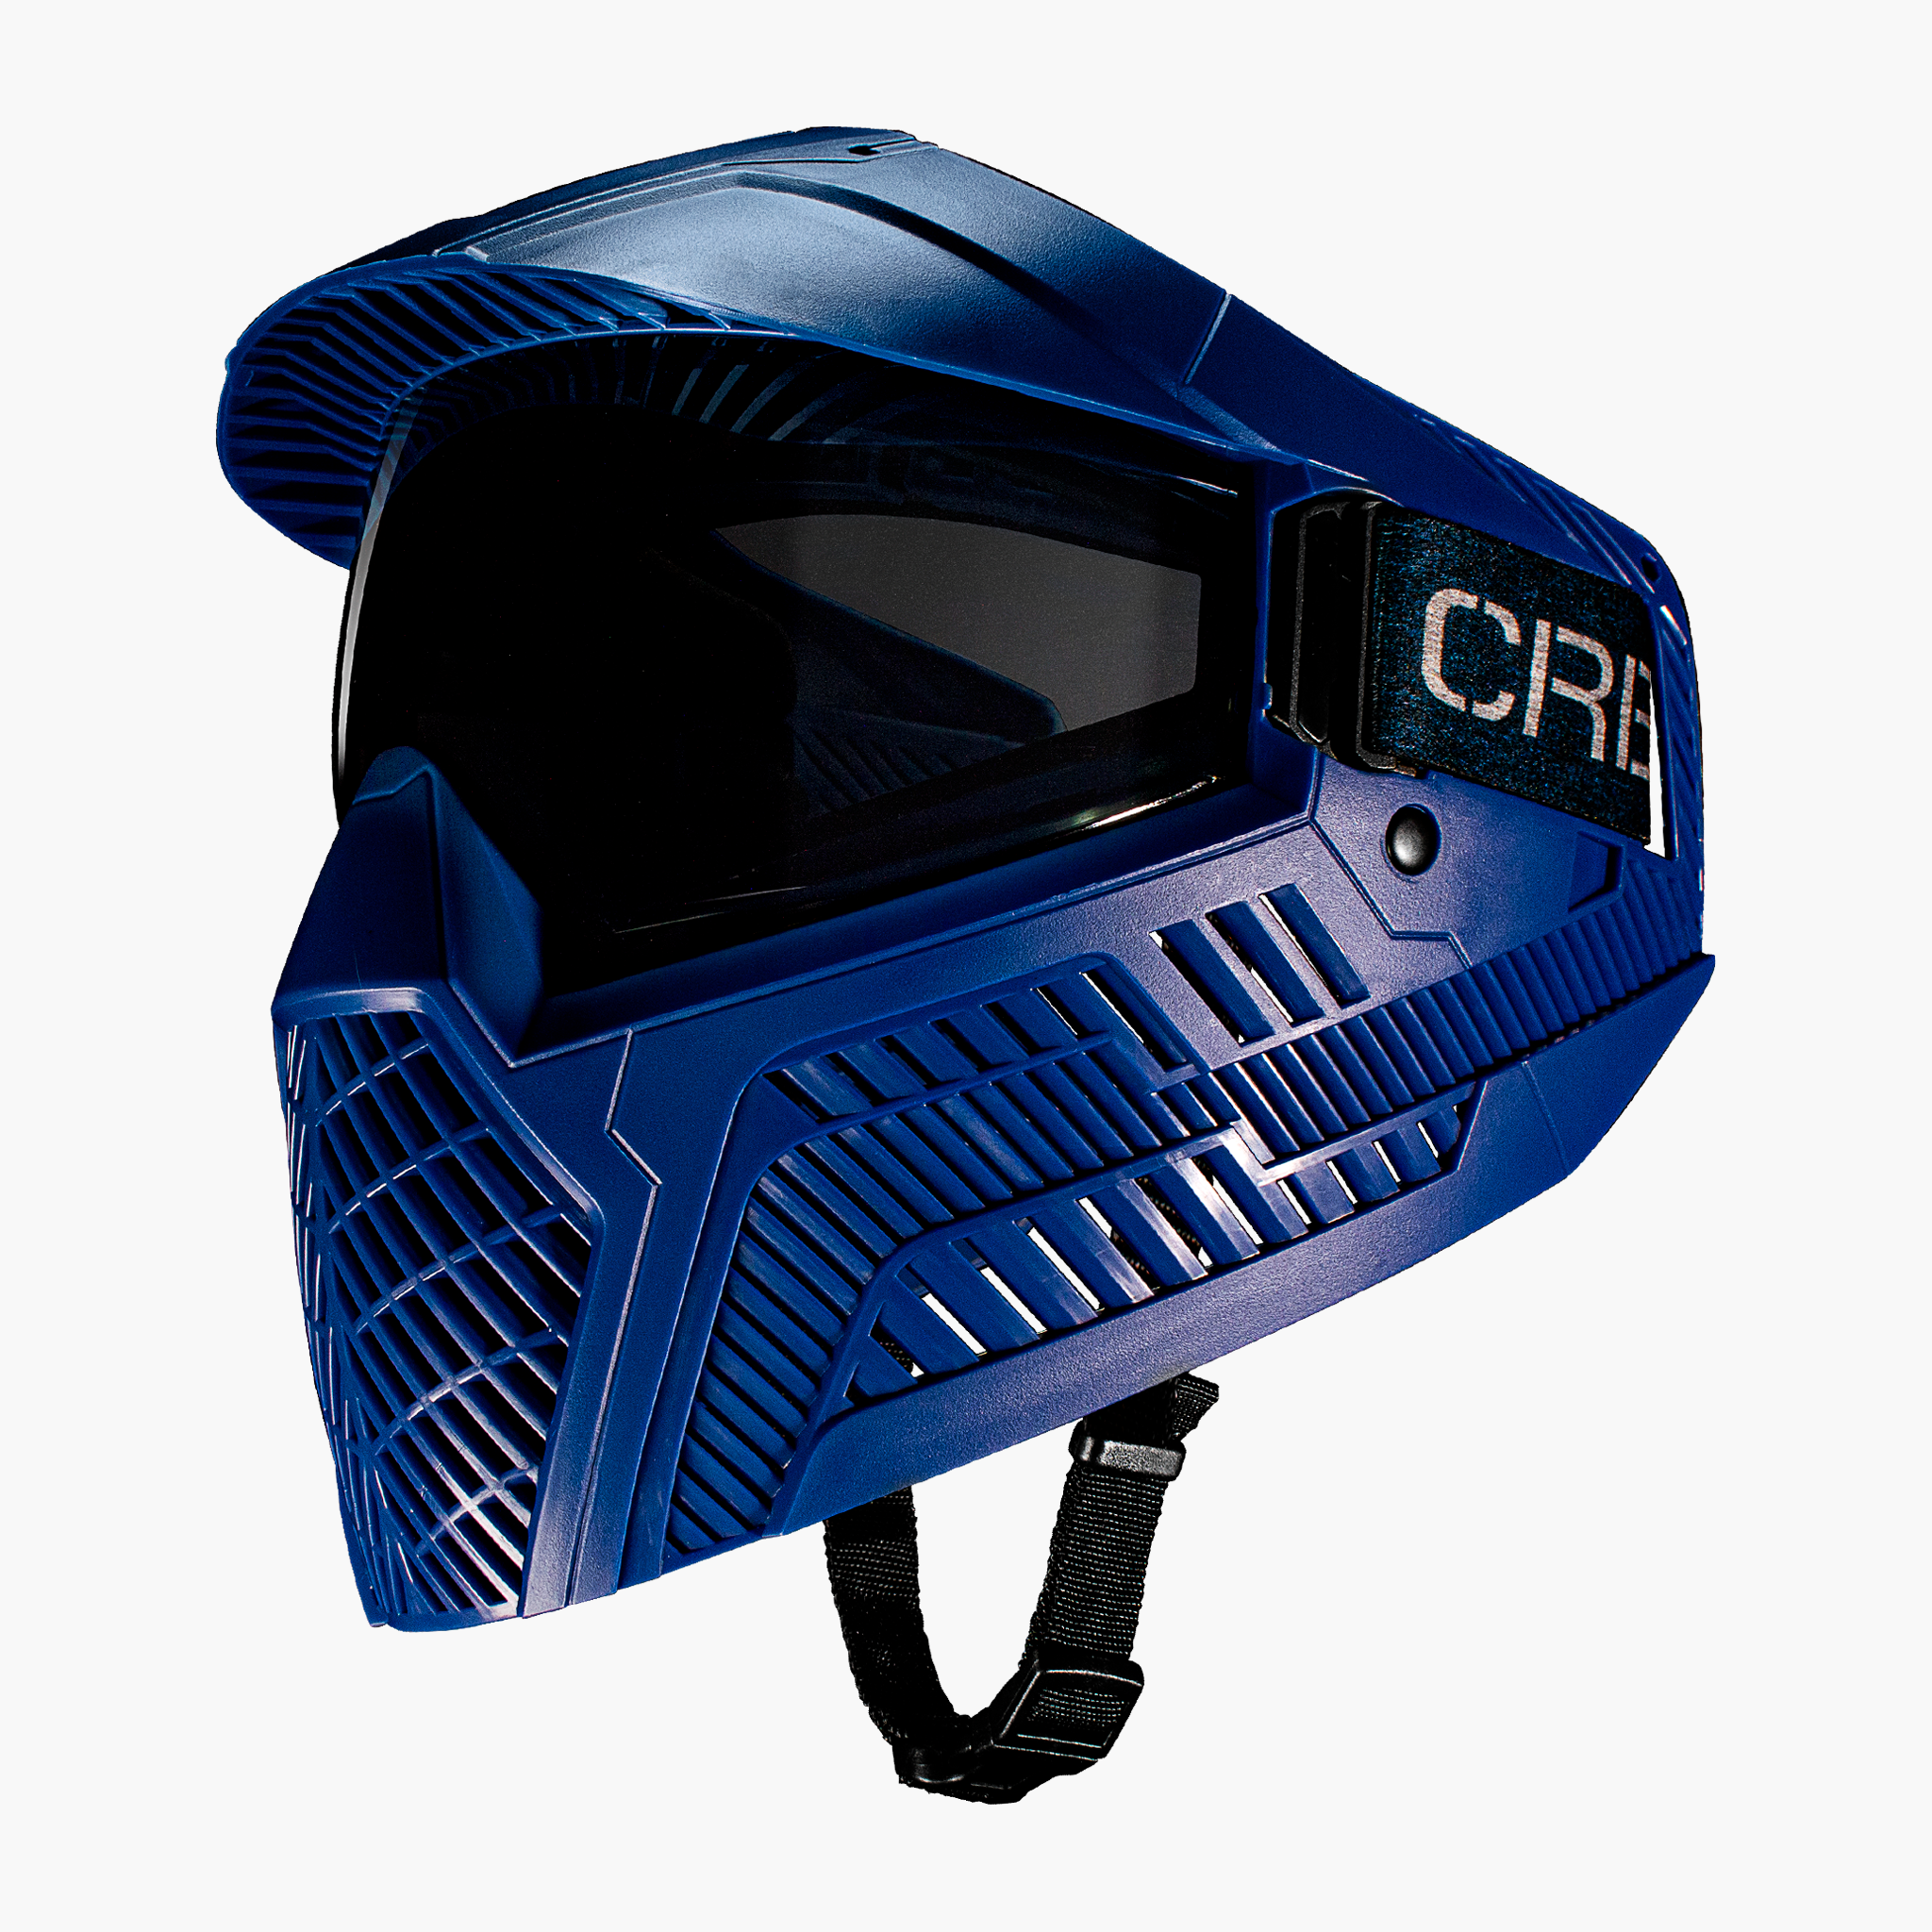 CRBN OPR GOGGLE NAVY